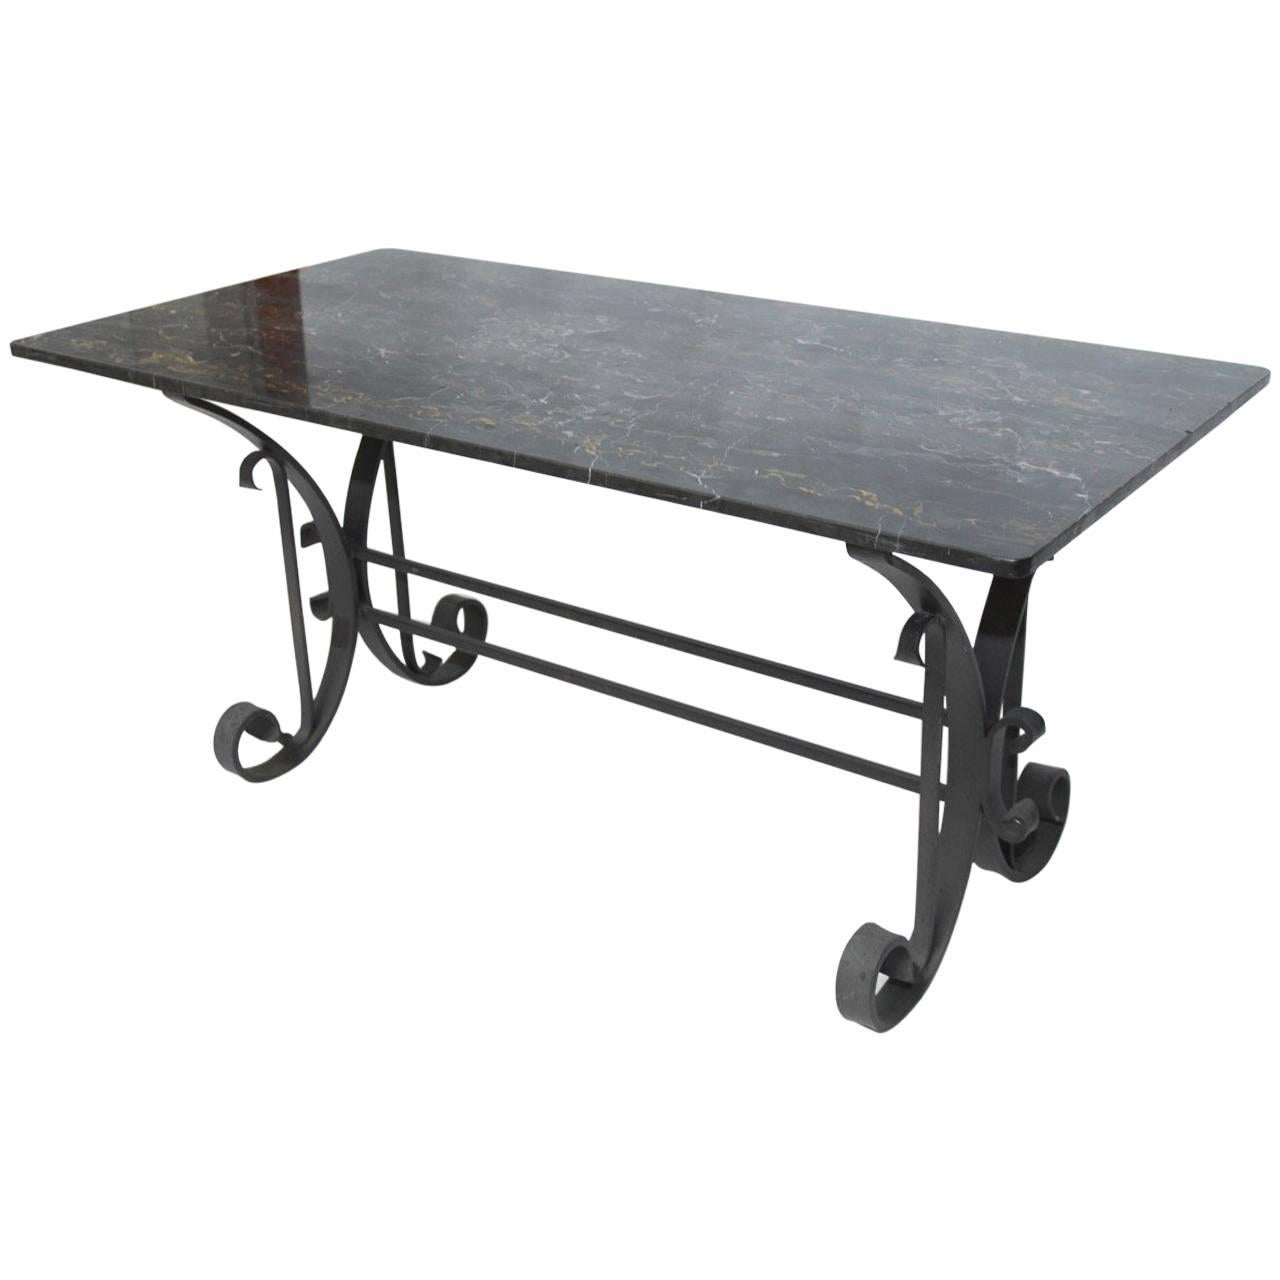 Italian Wrought Iron and Black Marble Dining Table For Sale